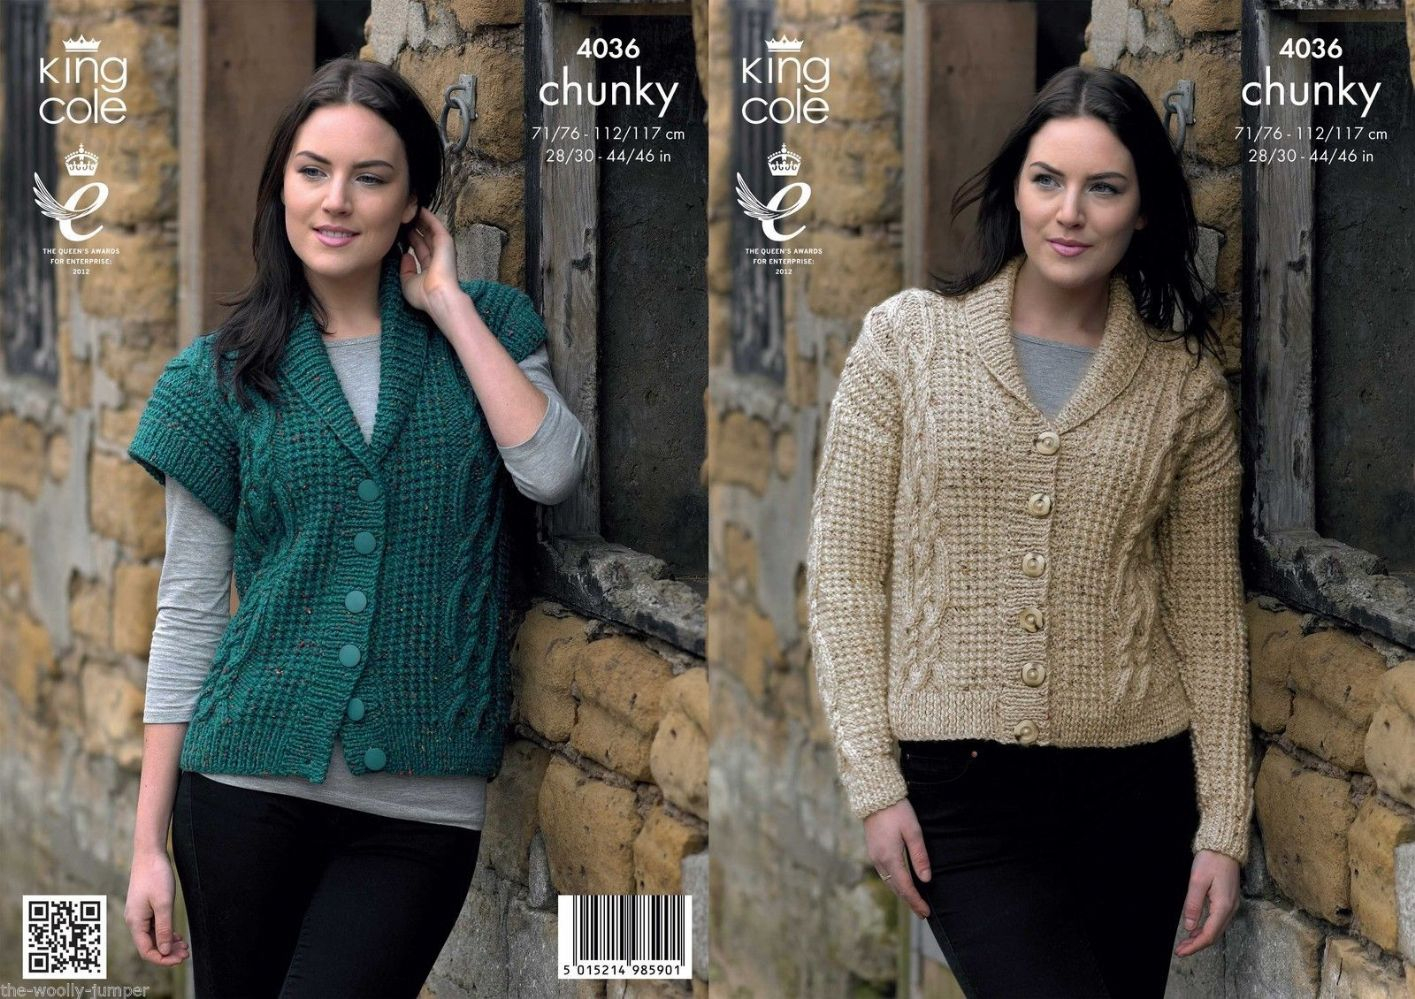 Knitted Jacket Patterns 4036 King Cole Chunky Tweed Cardigan Jacket Waistcoat Knitting Pattern To Chest 28 To 46